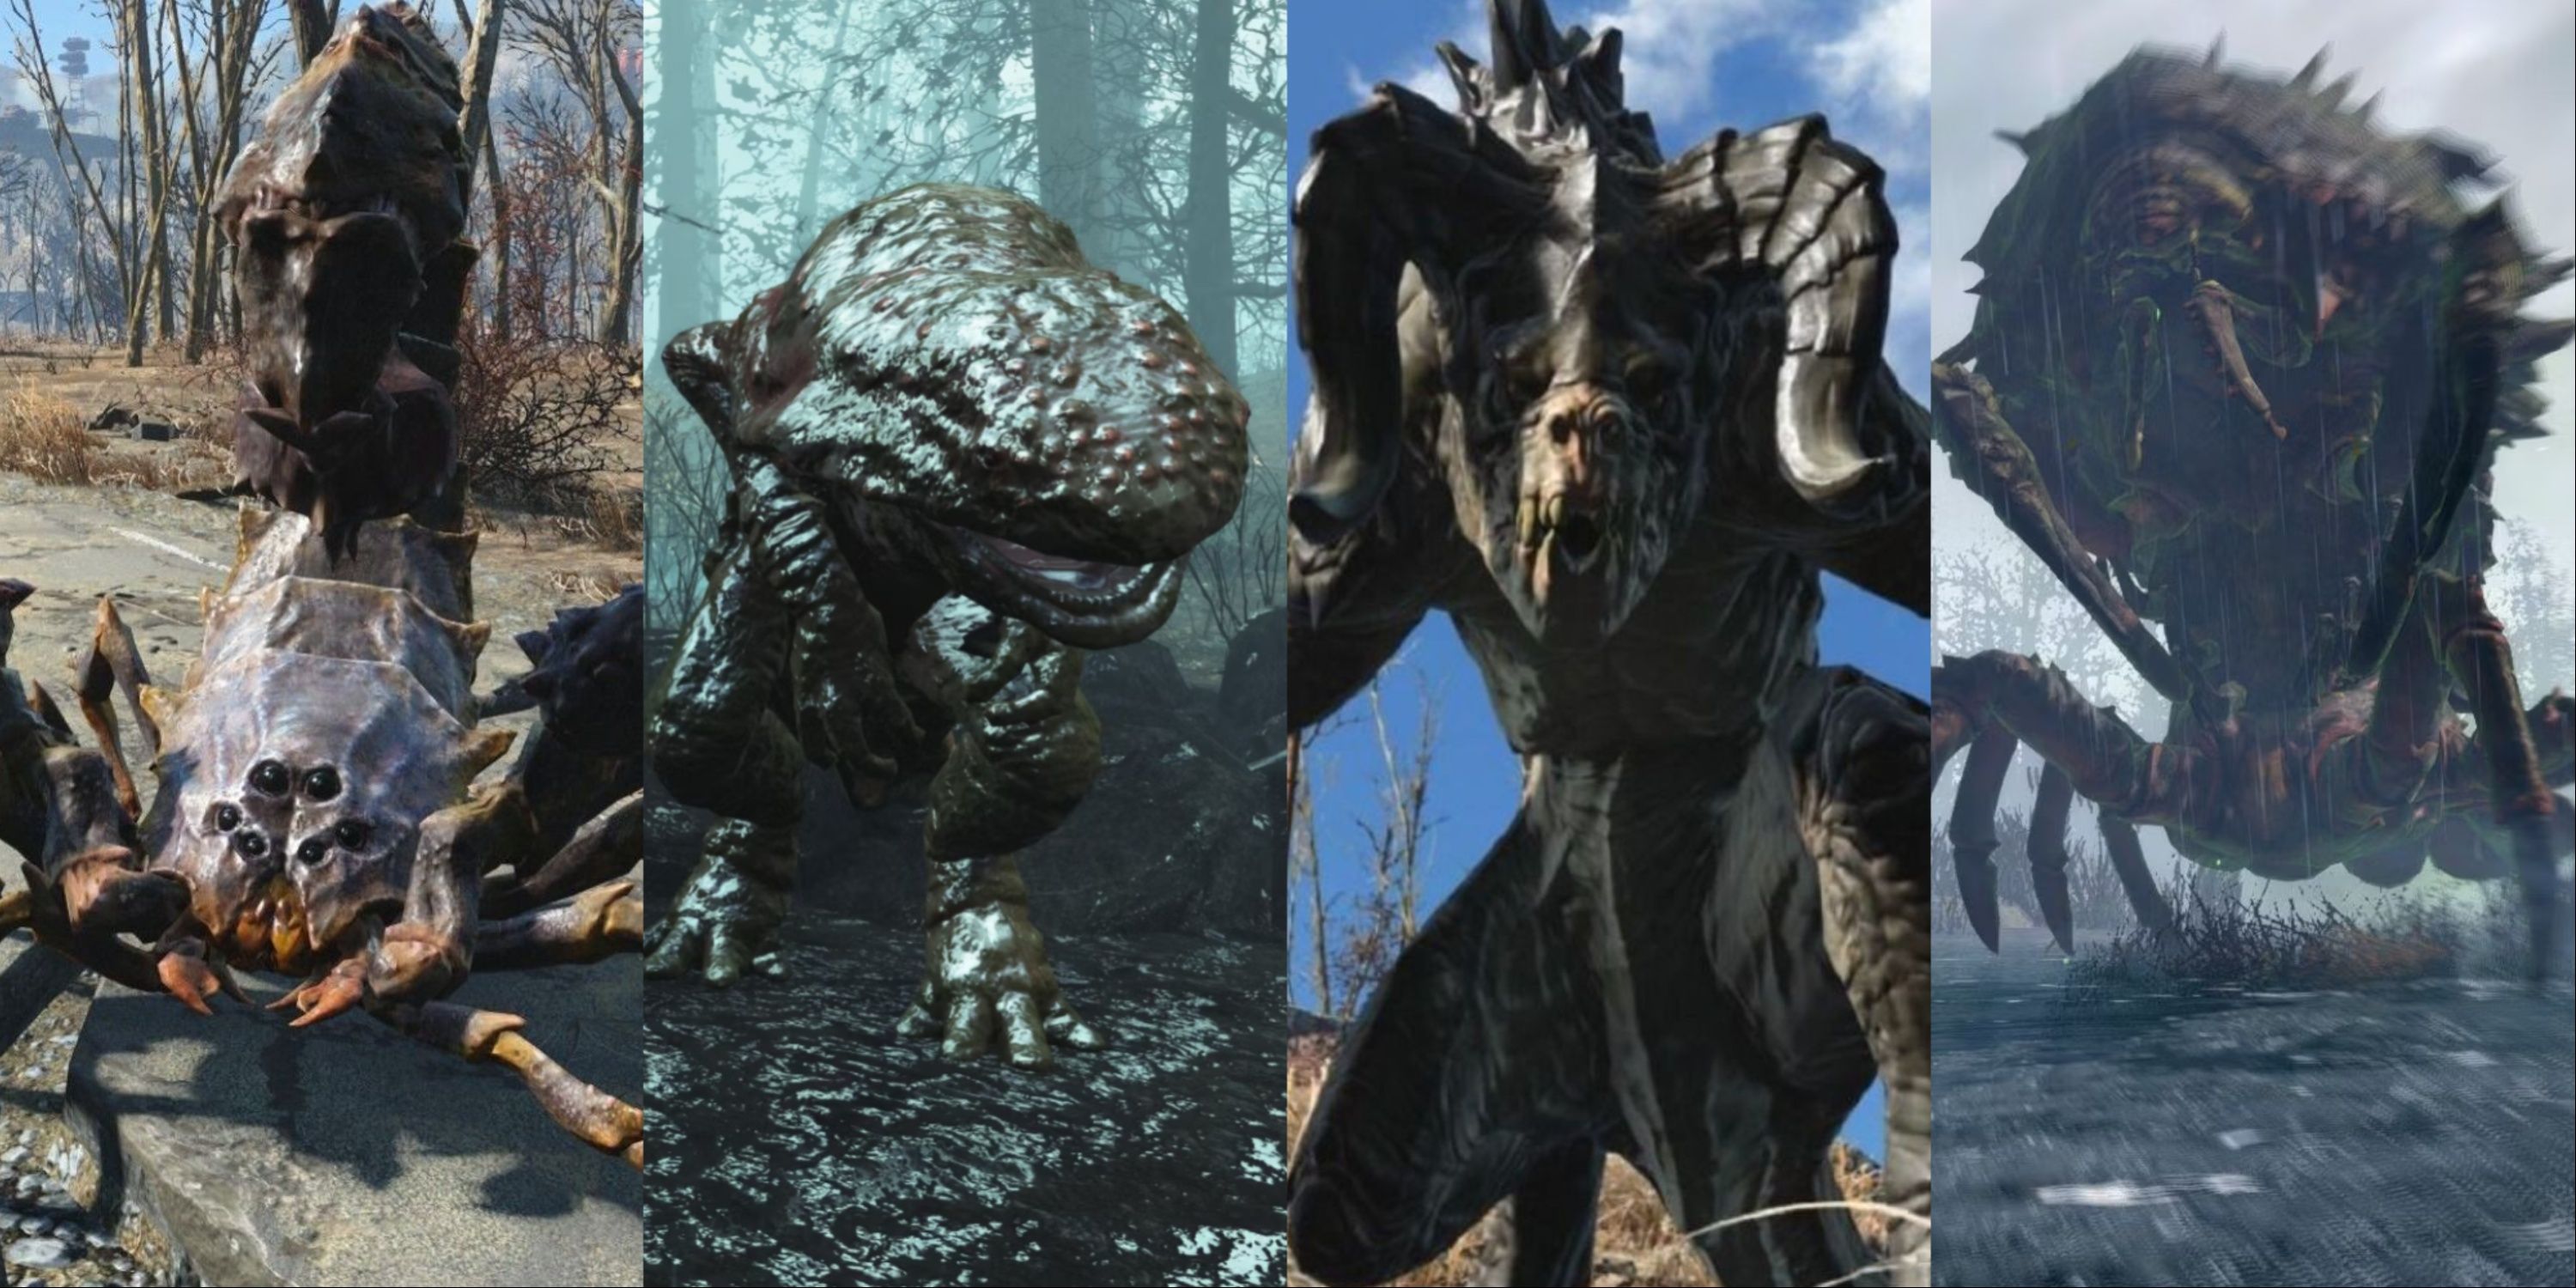 A view of a radscorpion, a gulper, a deathclaw, and a mirelurk queen from Fallout